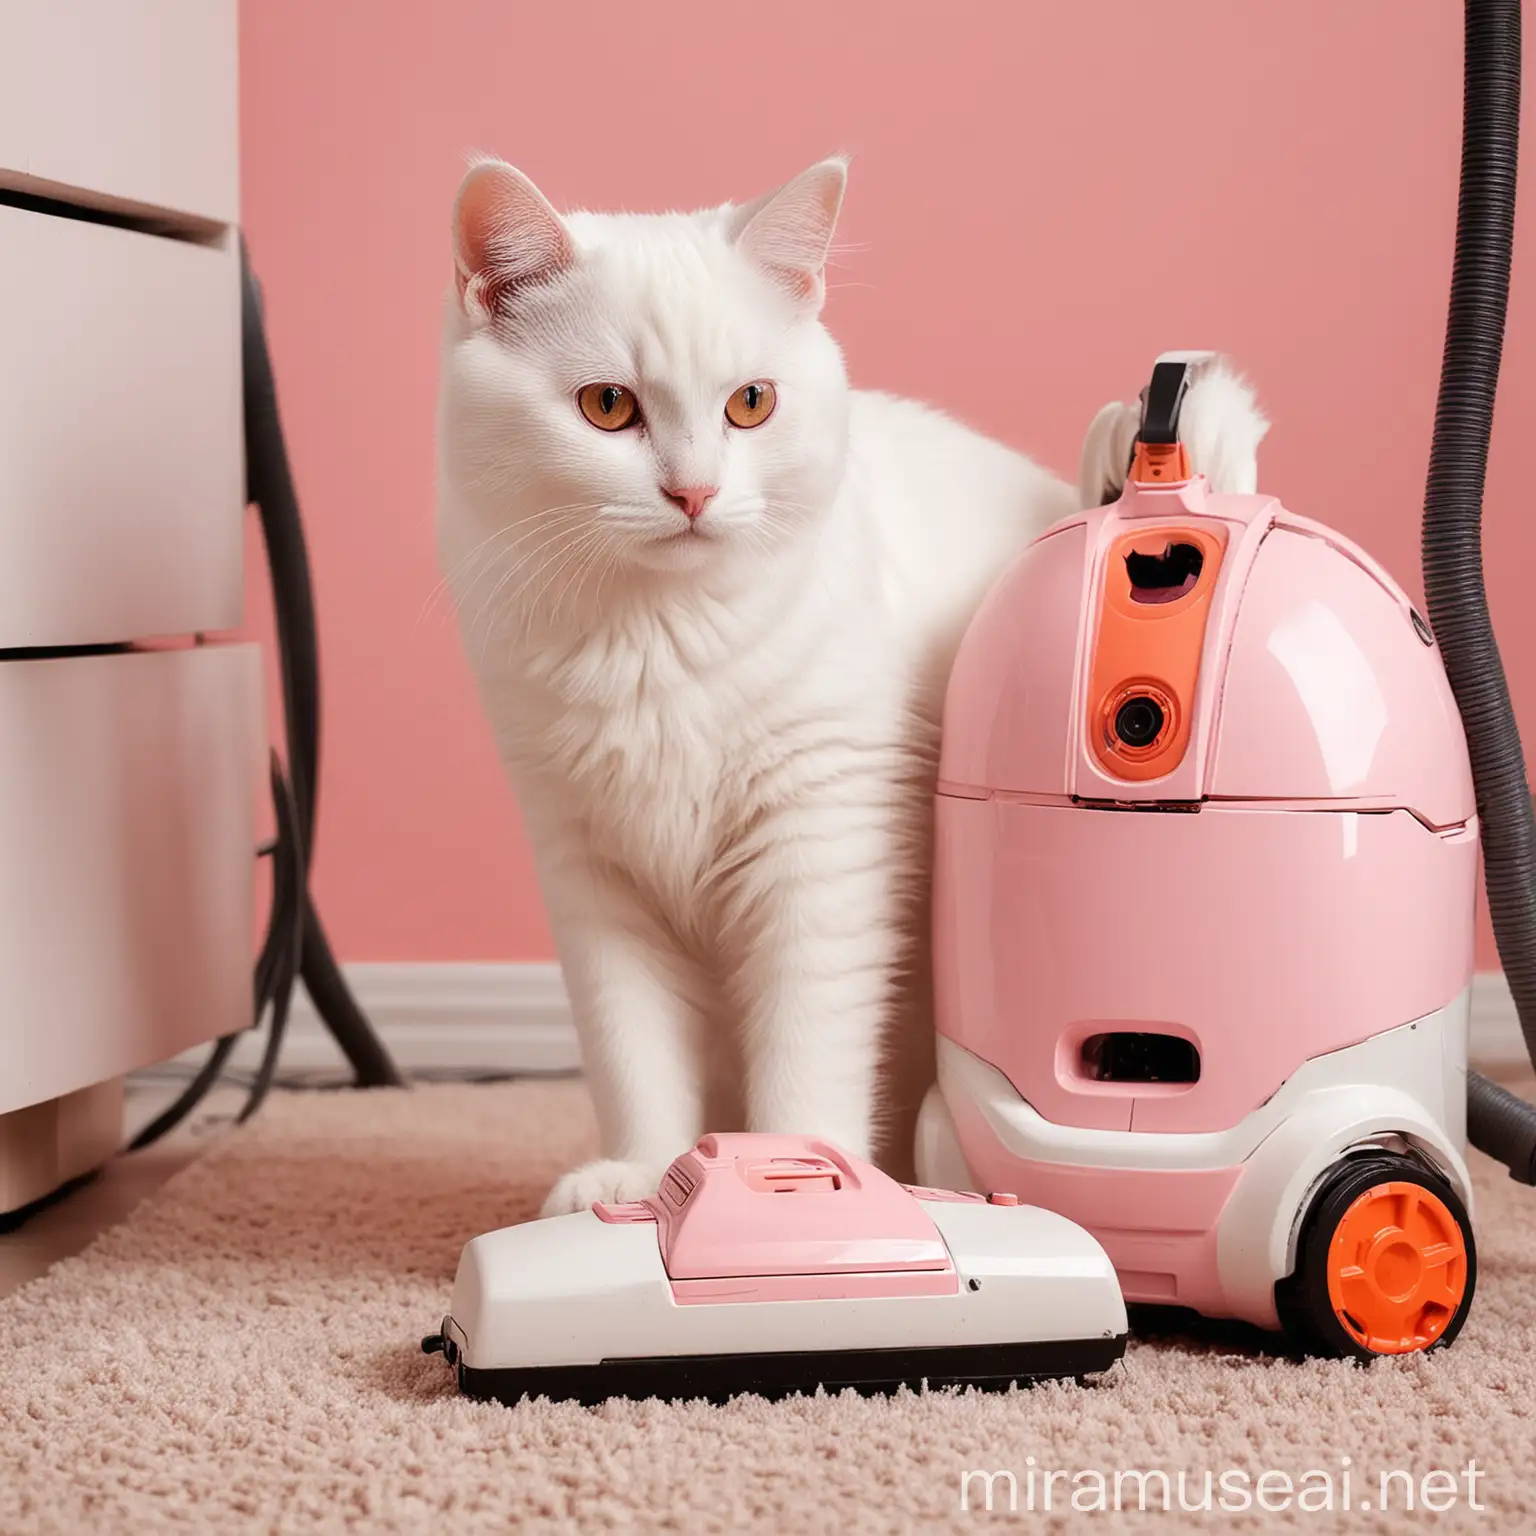 Curious White Kitty Observes Working Vacuum Cleaner in Pink and Orange Tones